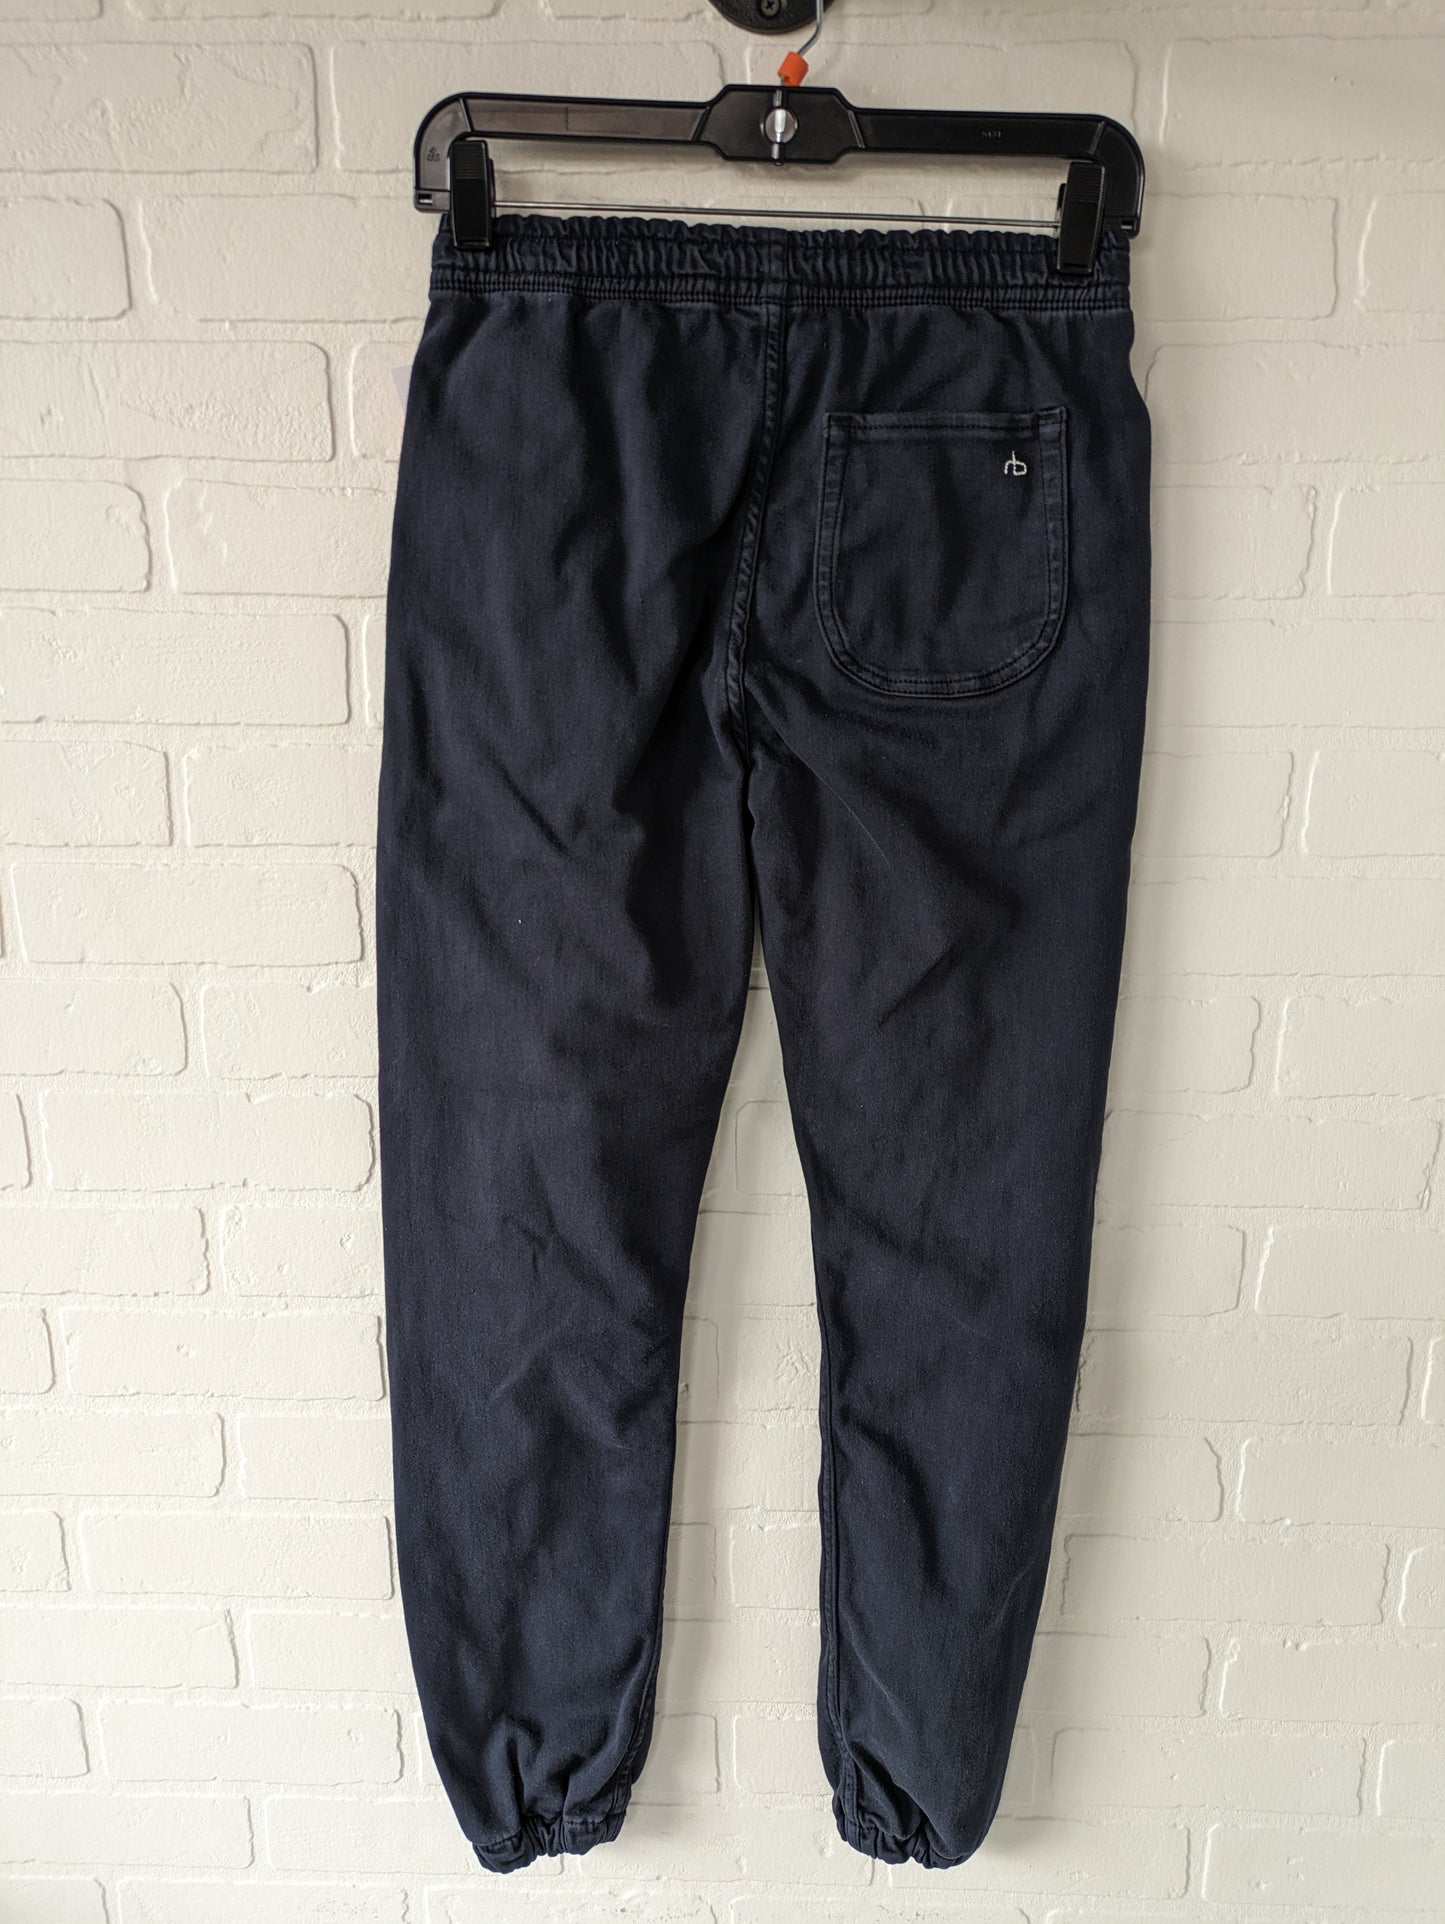 Pants Joggers By Rag And Bone  Size: 0